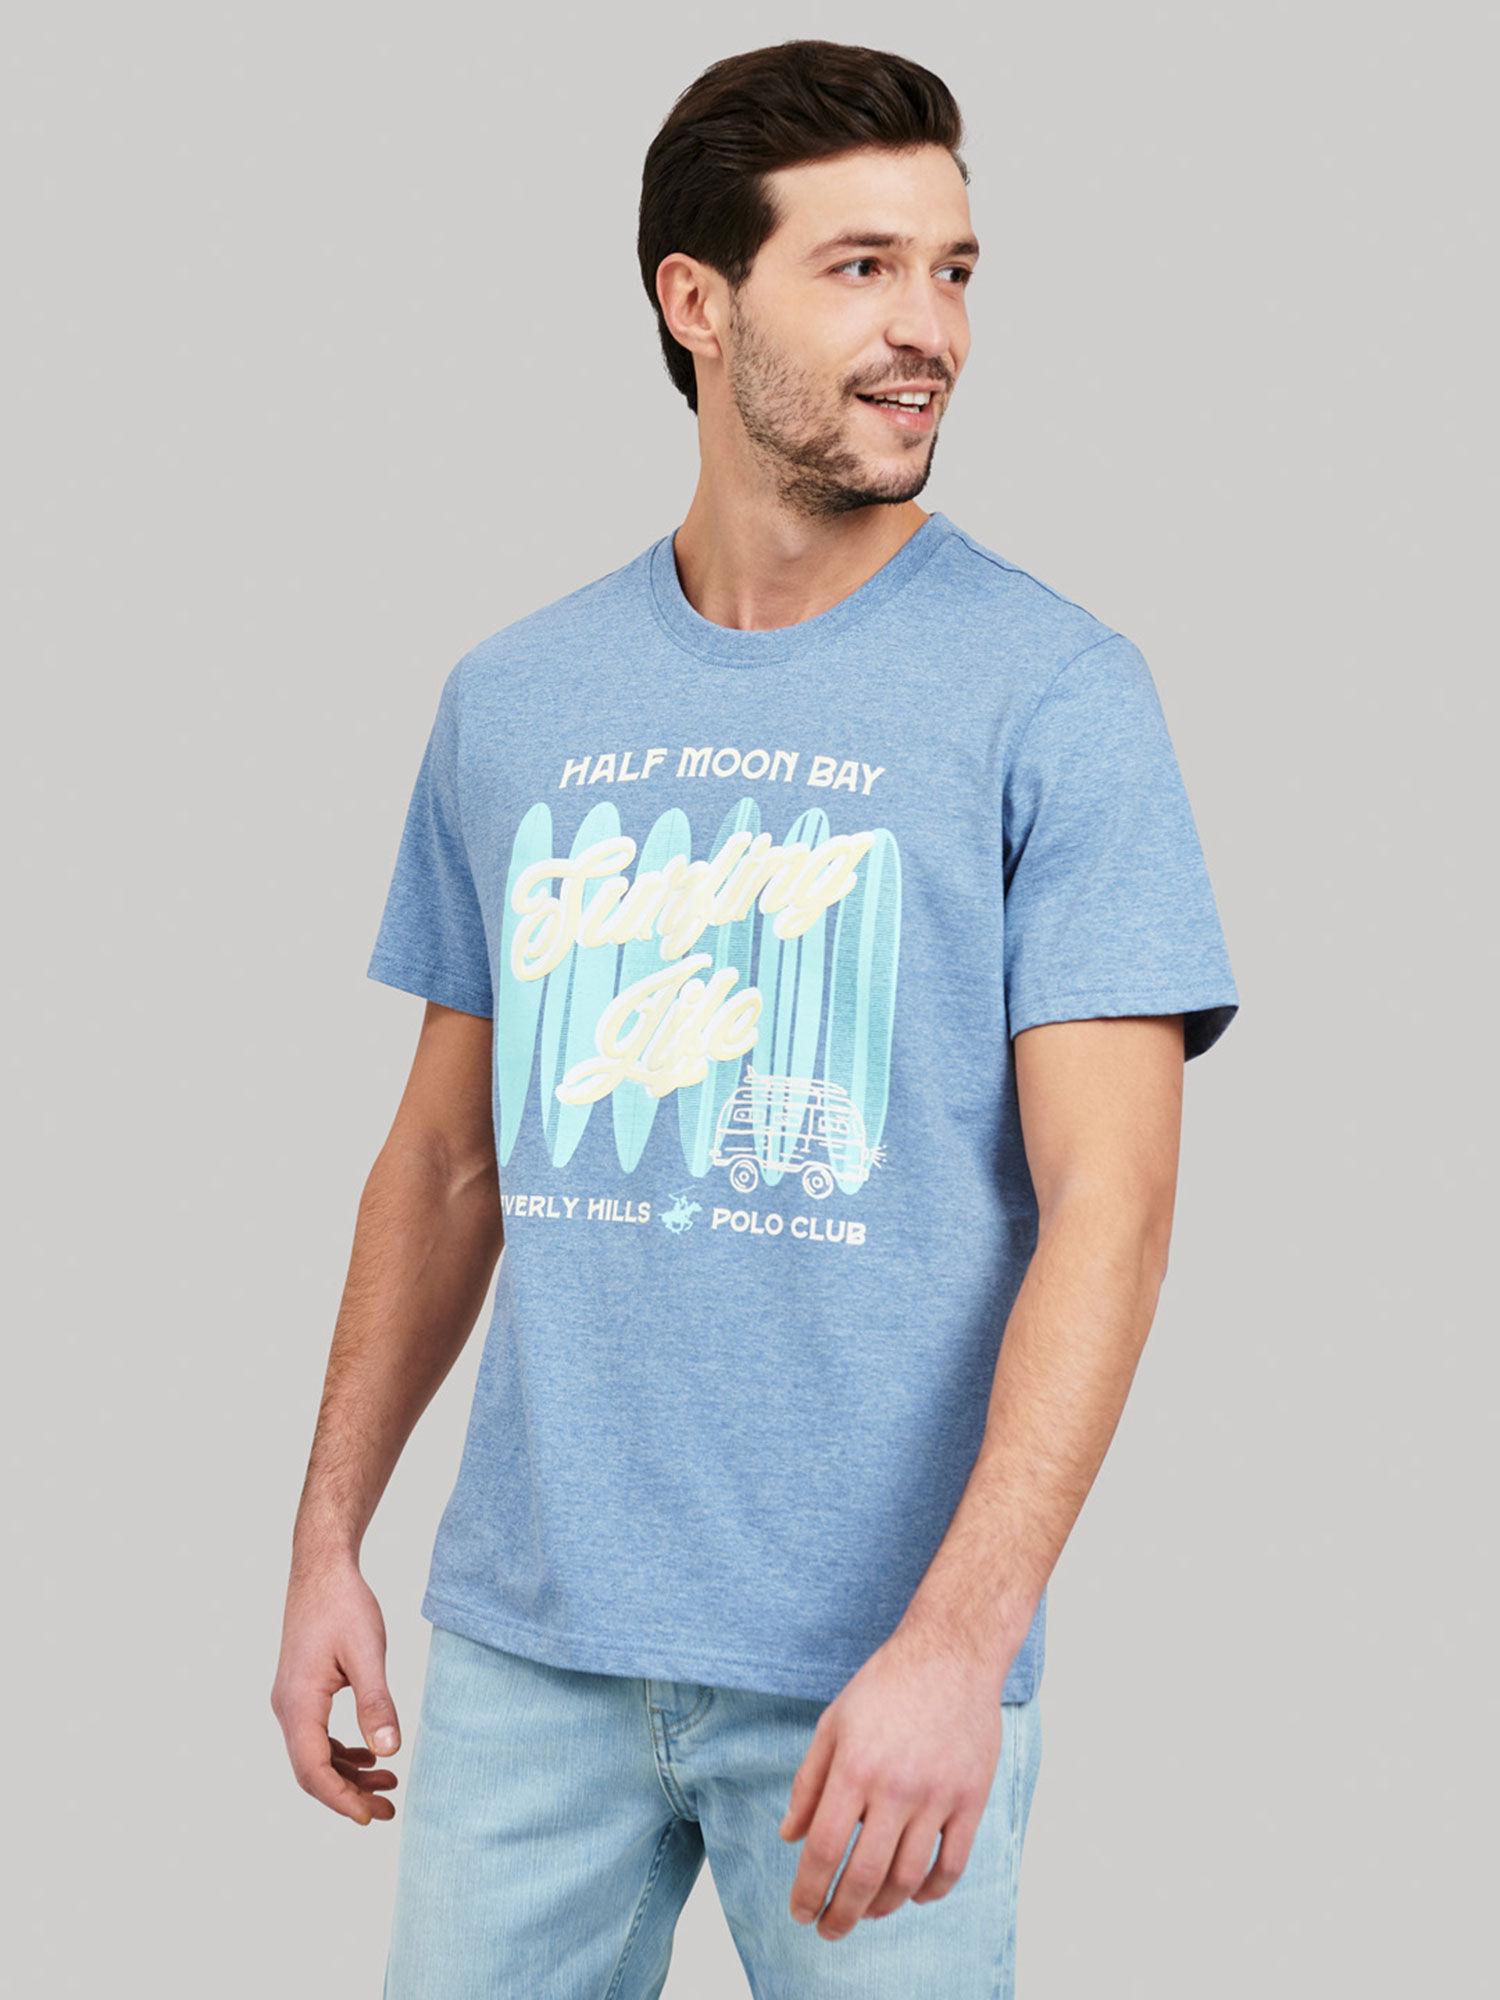 surfing life t-shirts